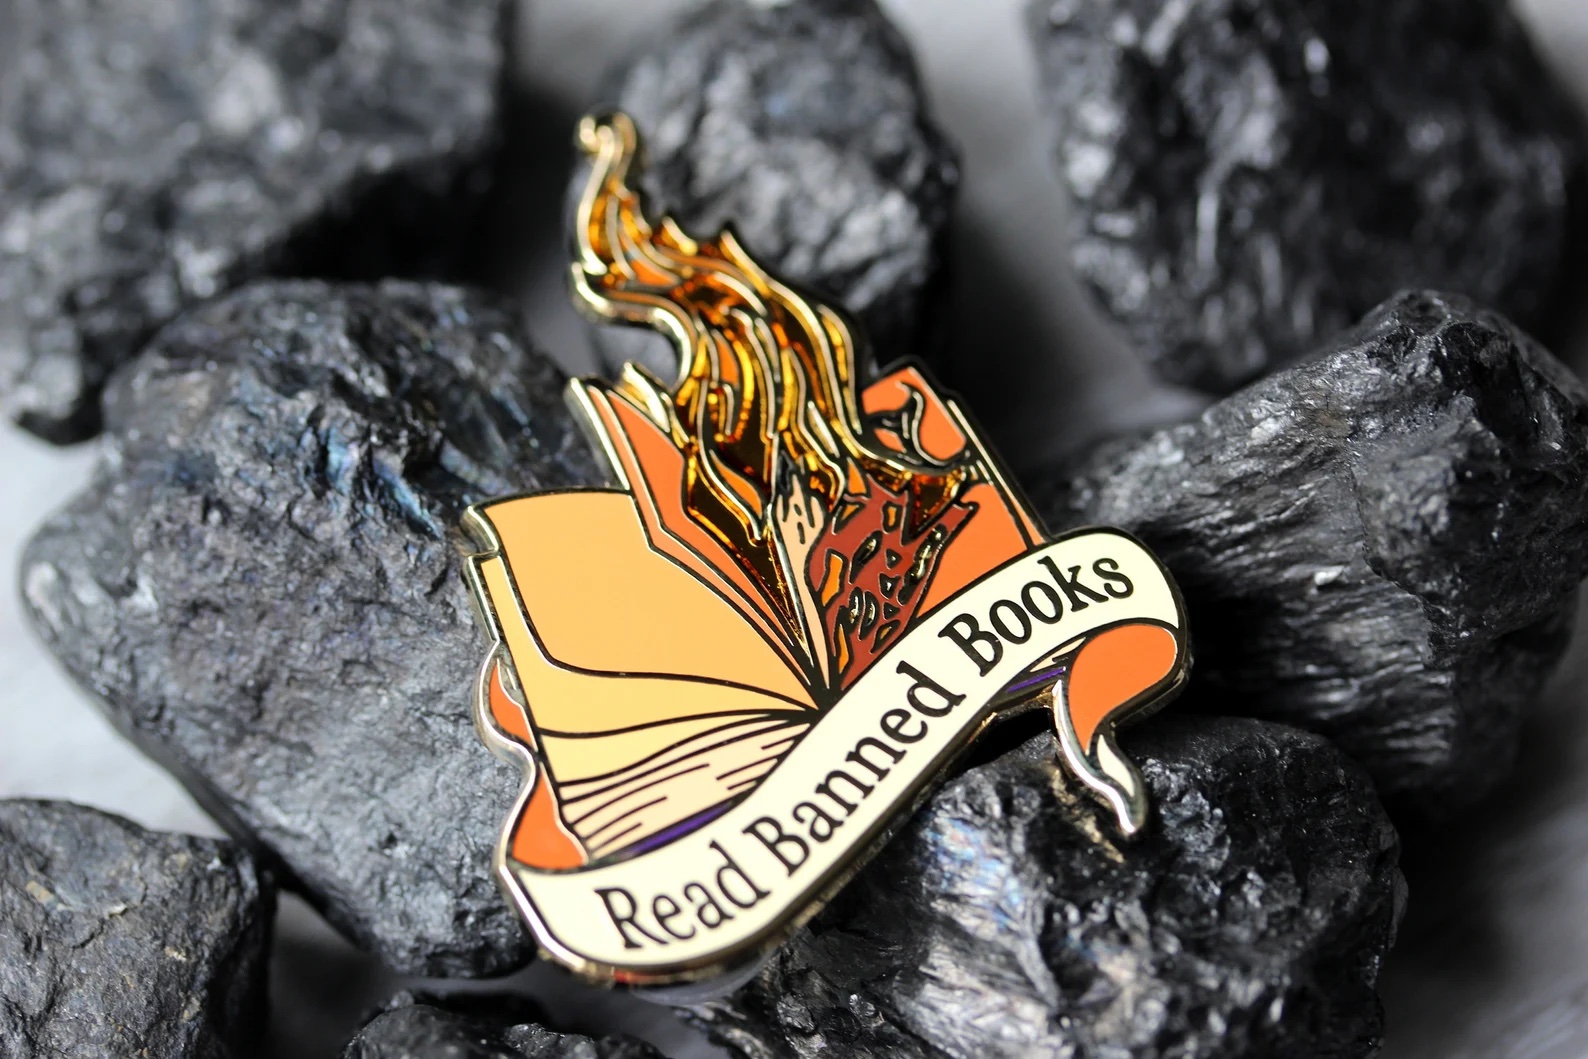 a photo of an enamel pin that features a book on fire and the phrase "Read Banned Books